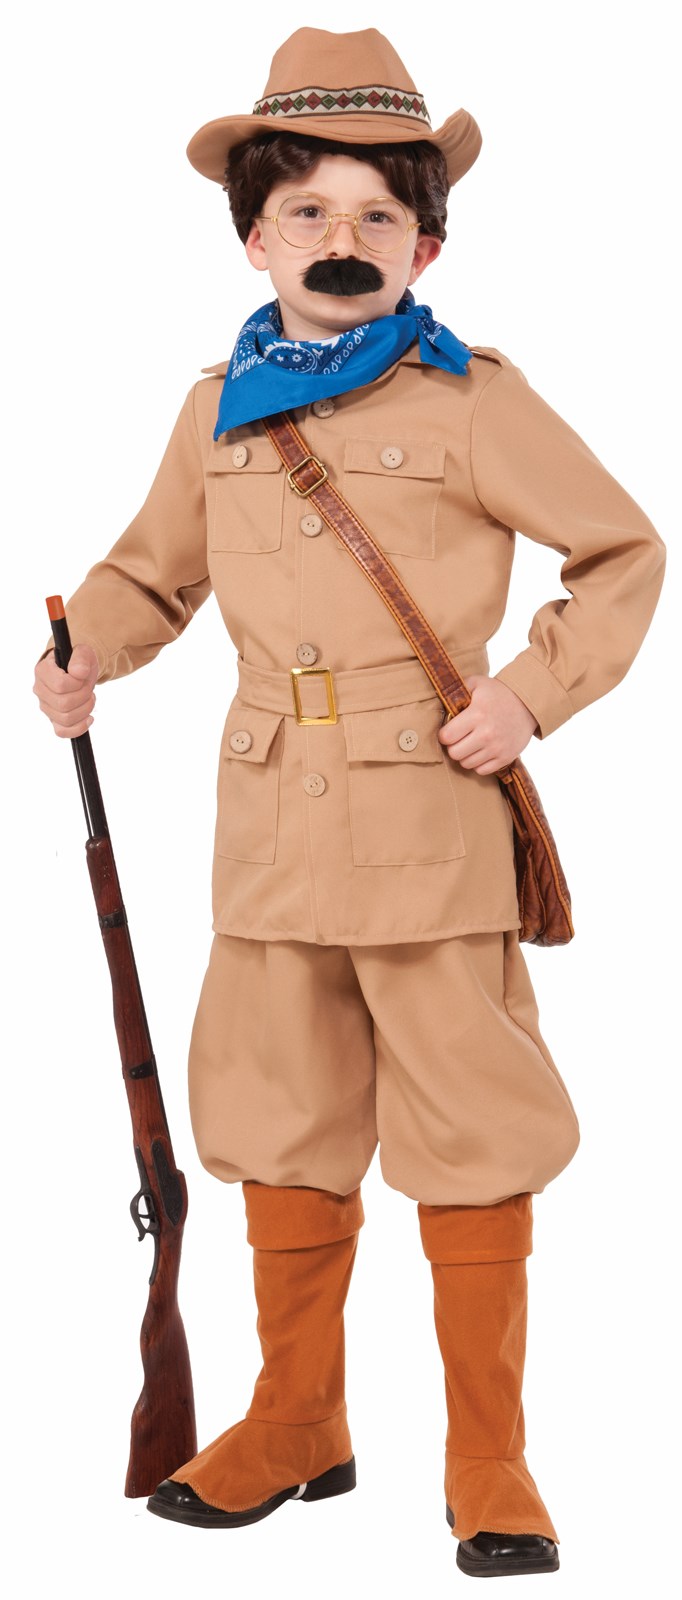 Theodore Roosevelt Costume for Kids